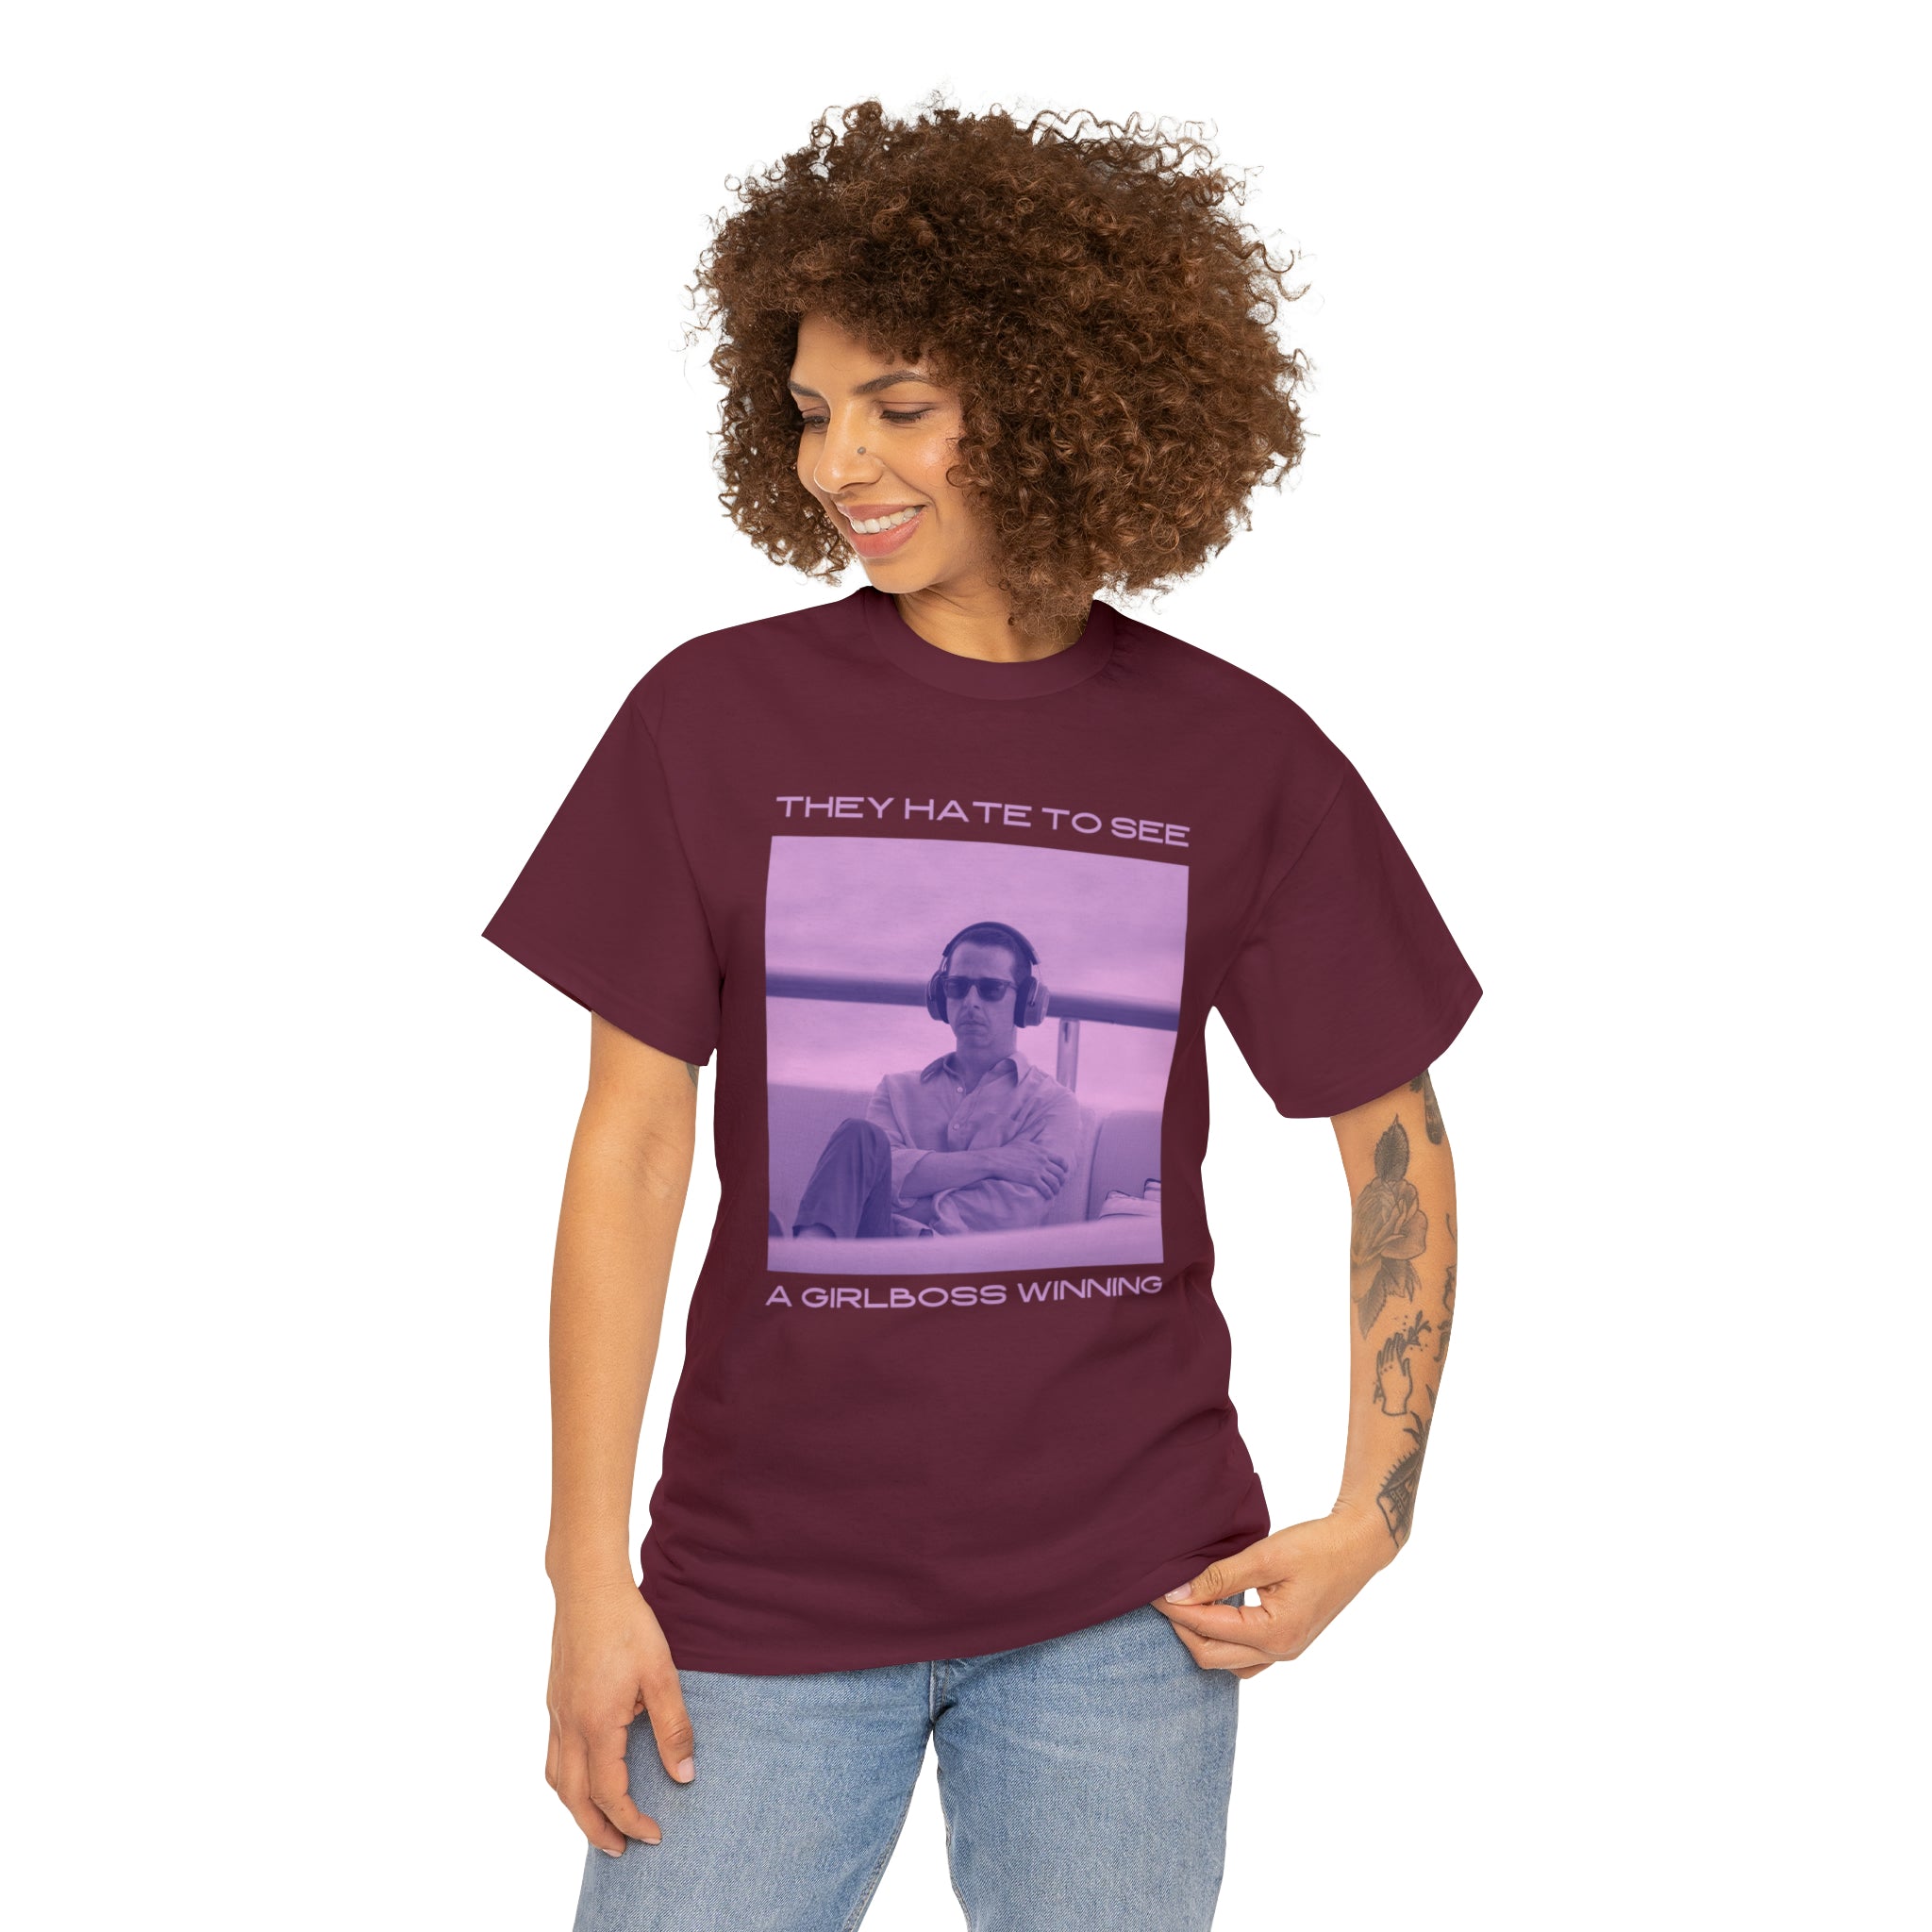 Kendall Roy They hate to see a girlboss winning - Unisex Heavy Cotton Tee